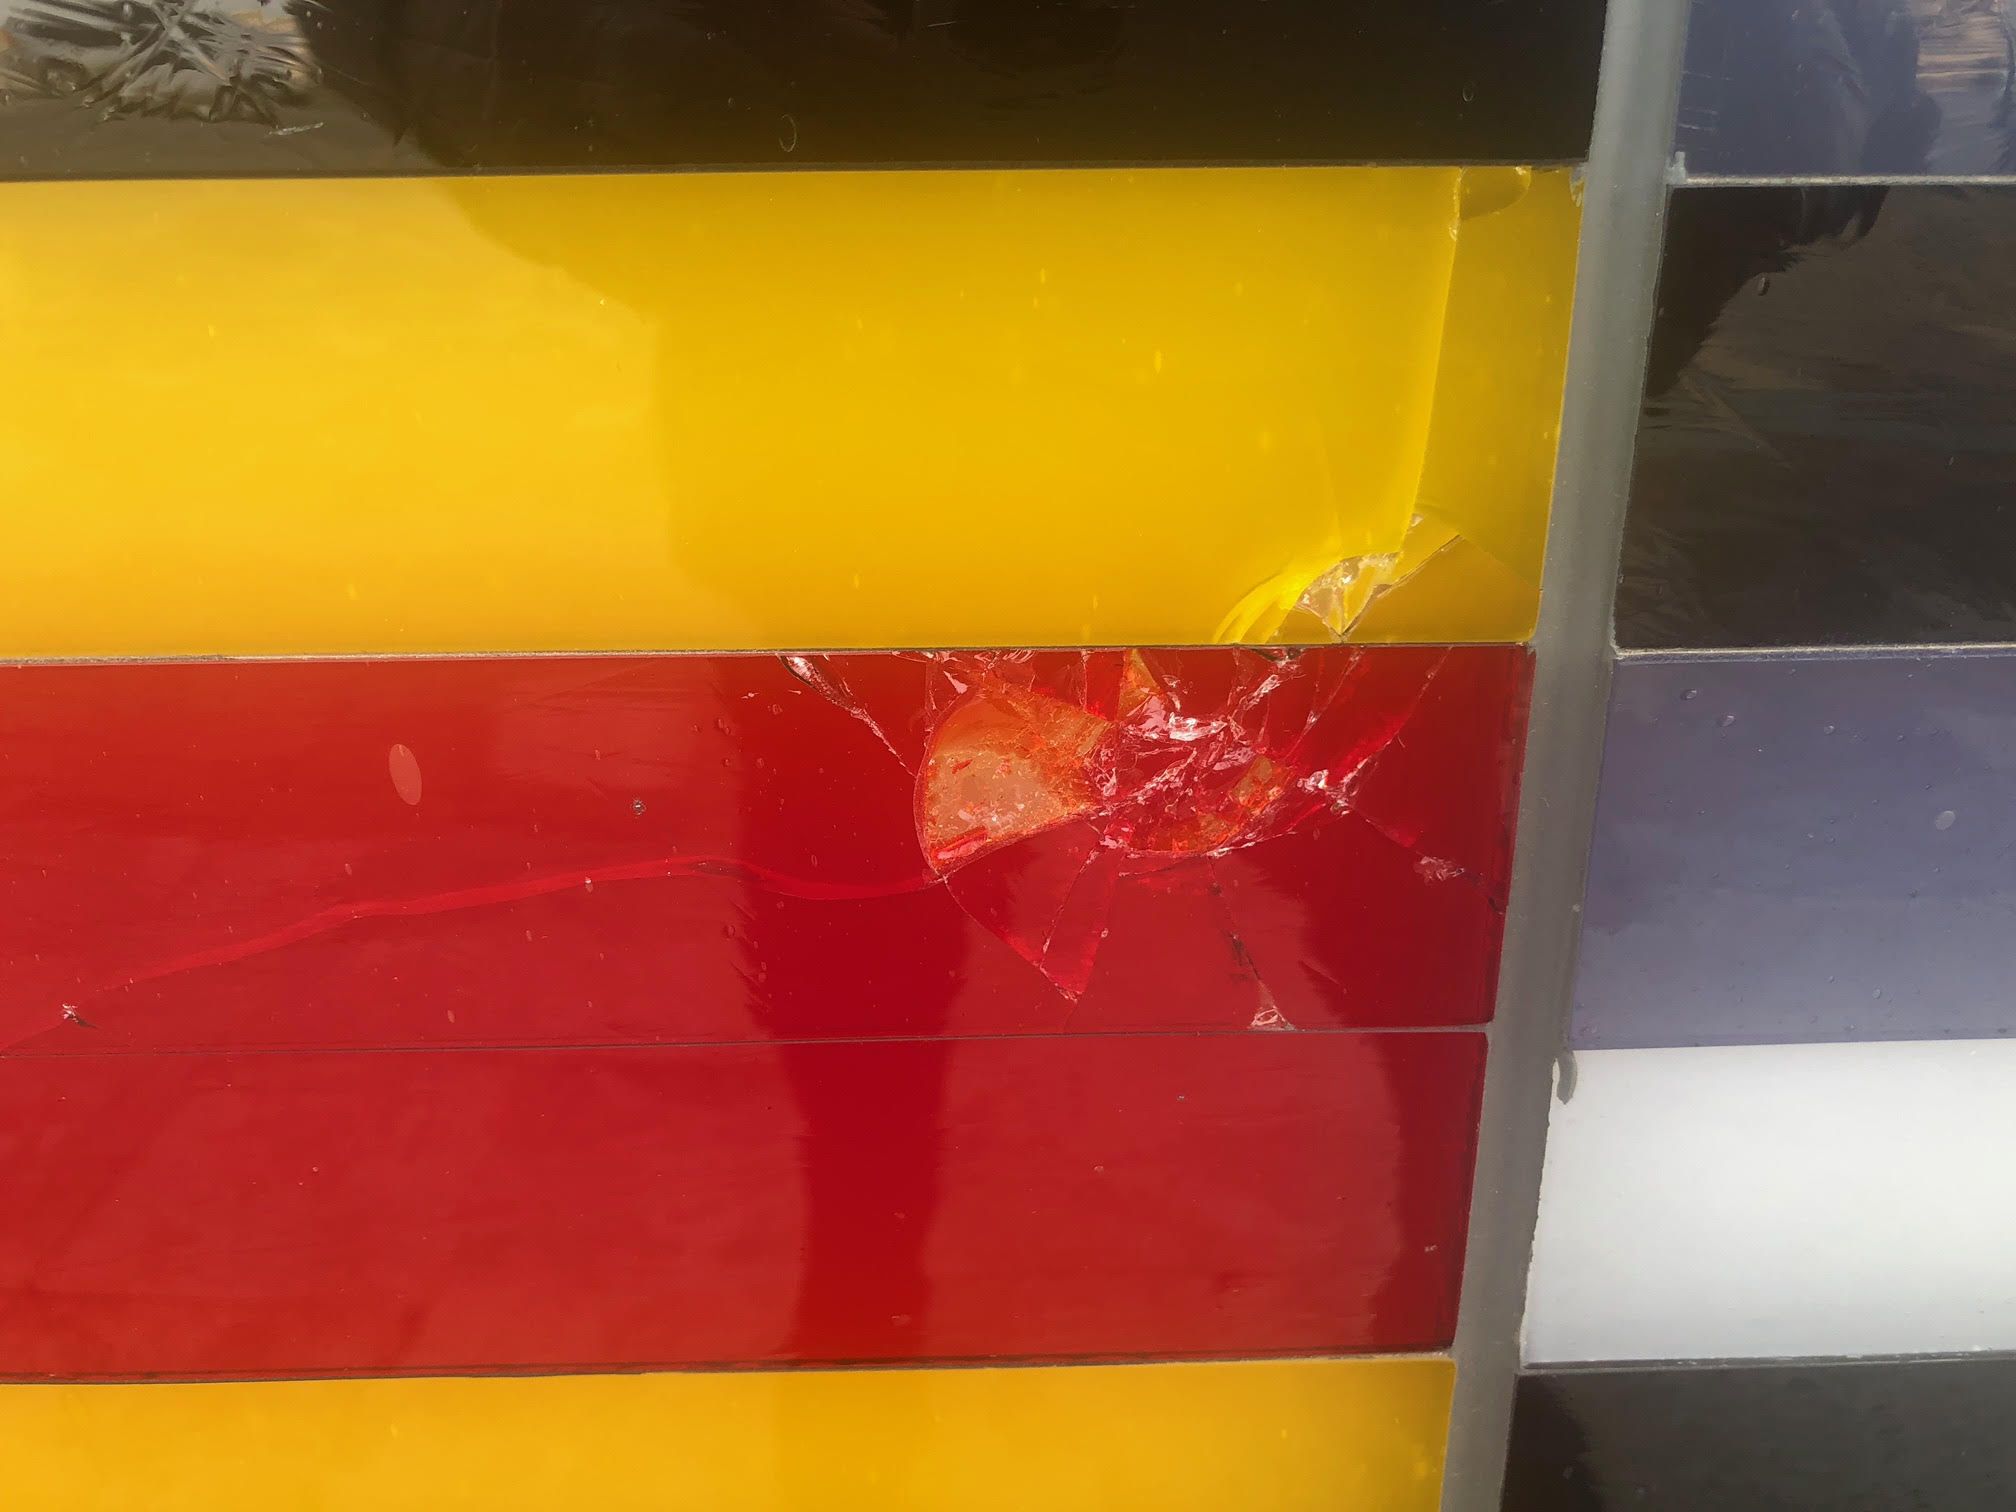 A photo of damage to a glass mural.